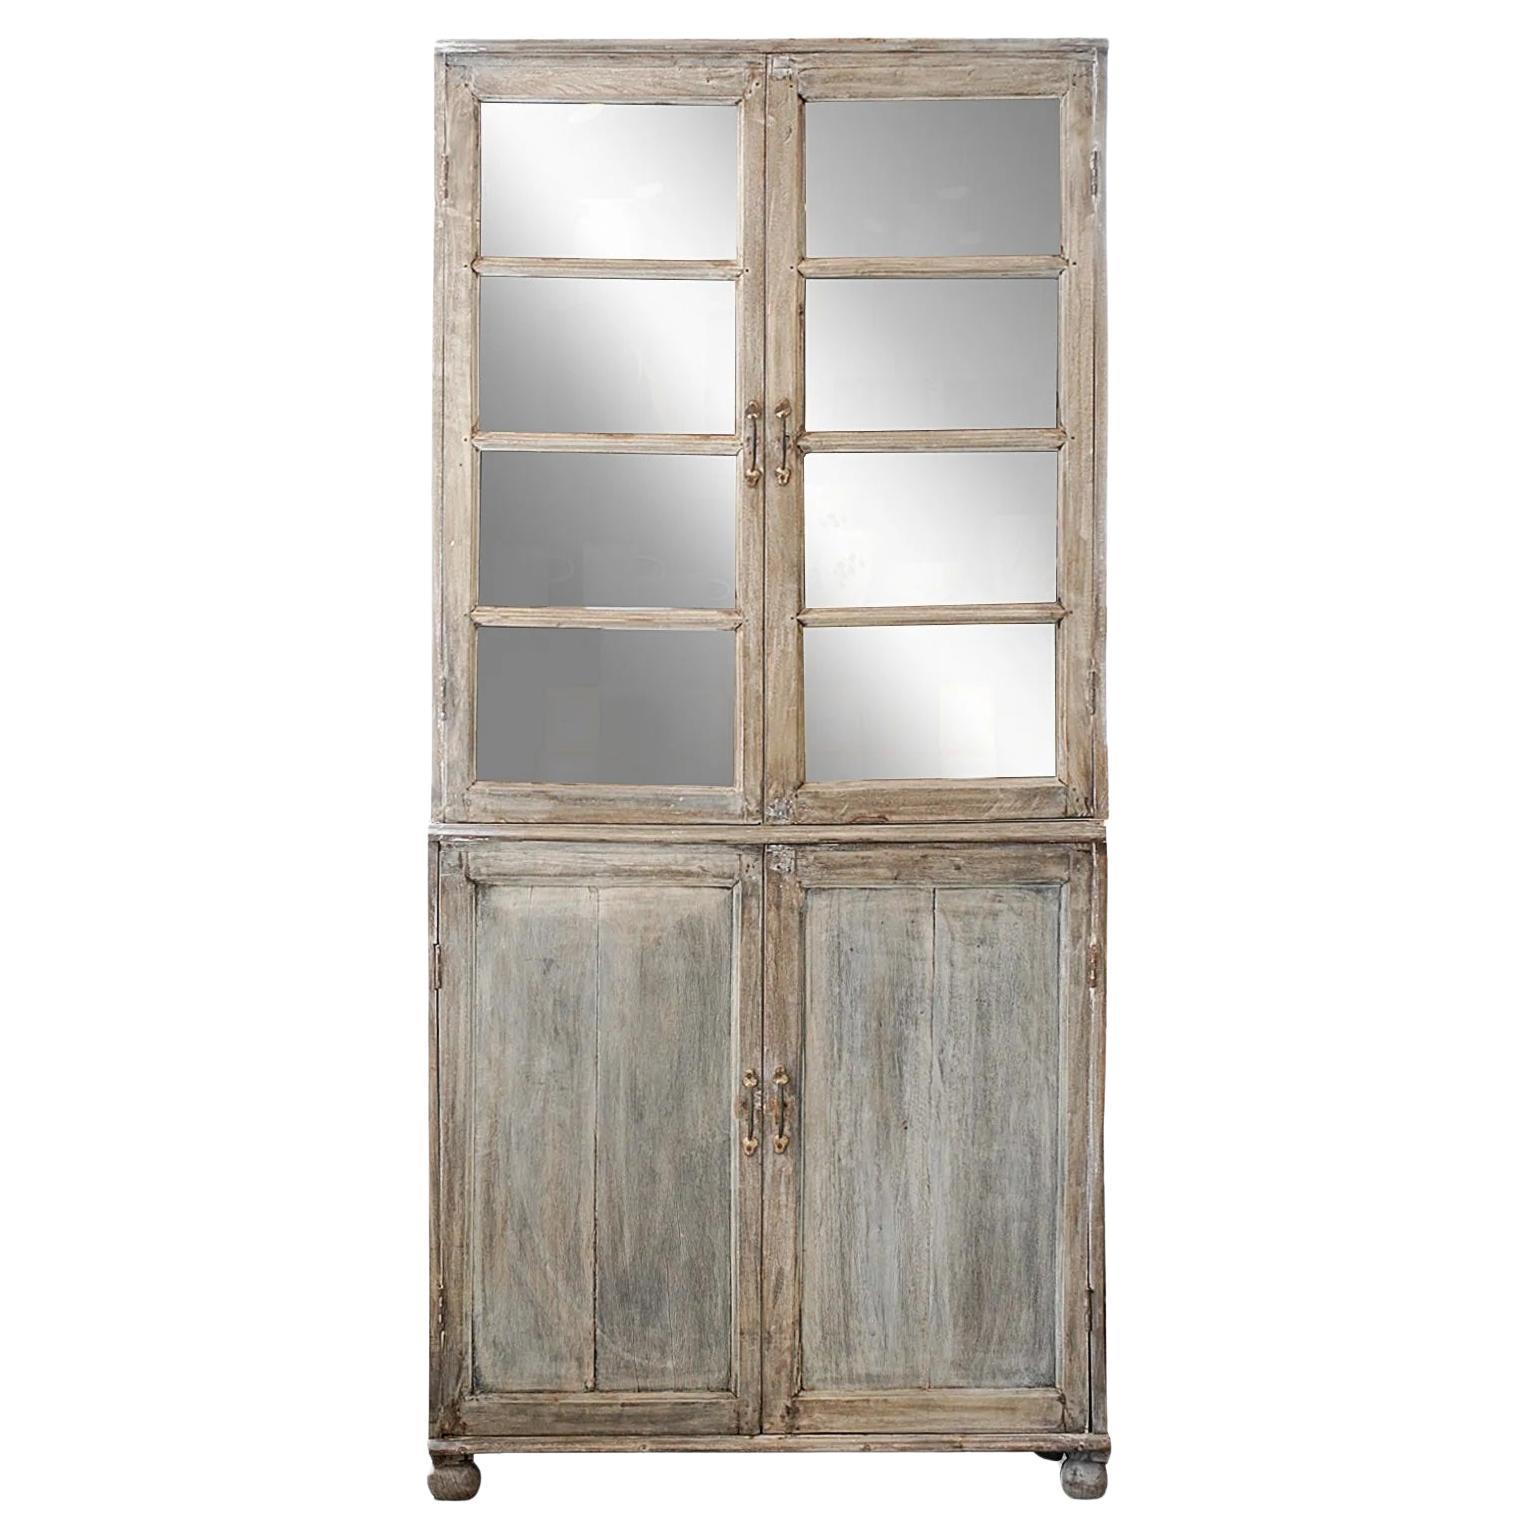 Rustic Teak Cabinet with Glass Display Windows and Storage